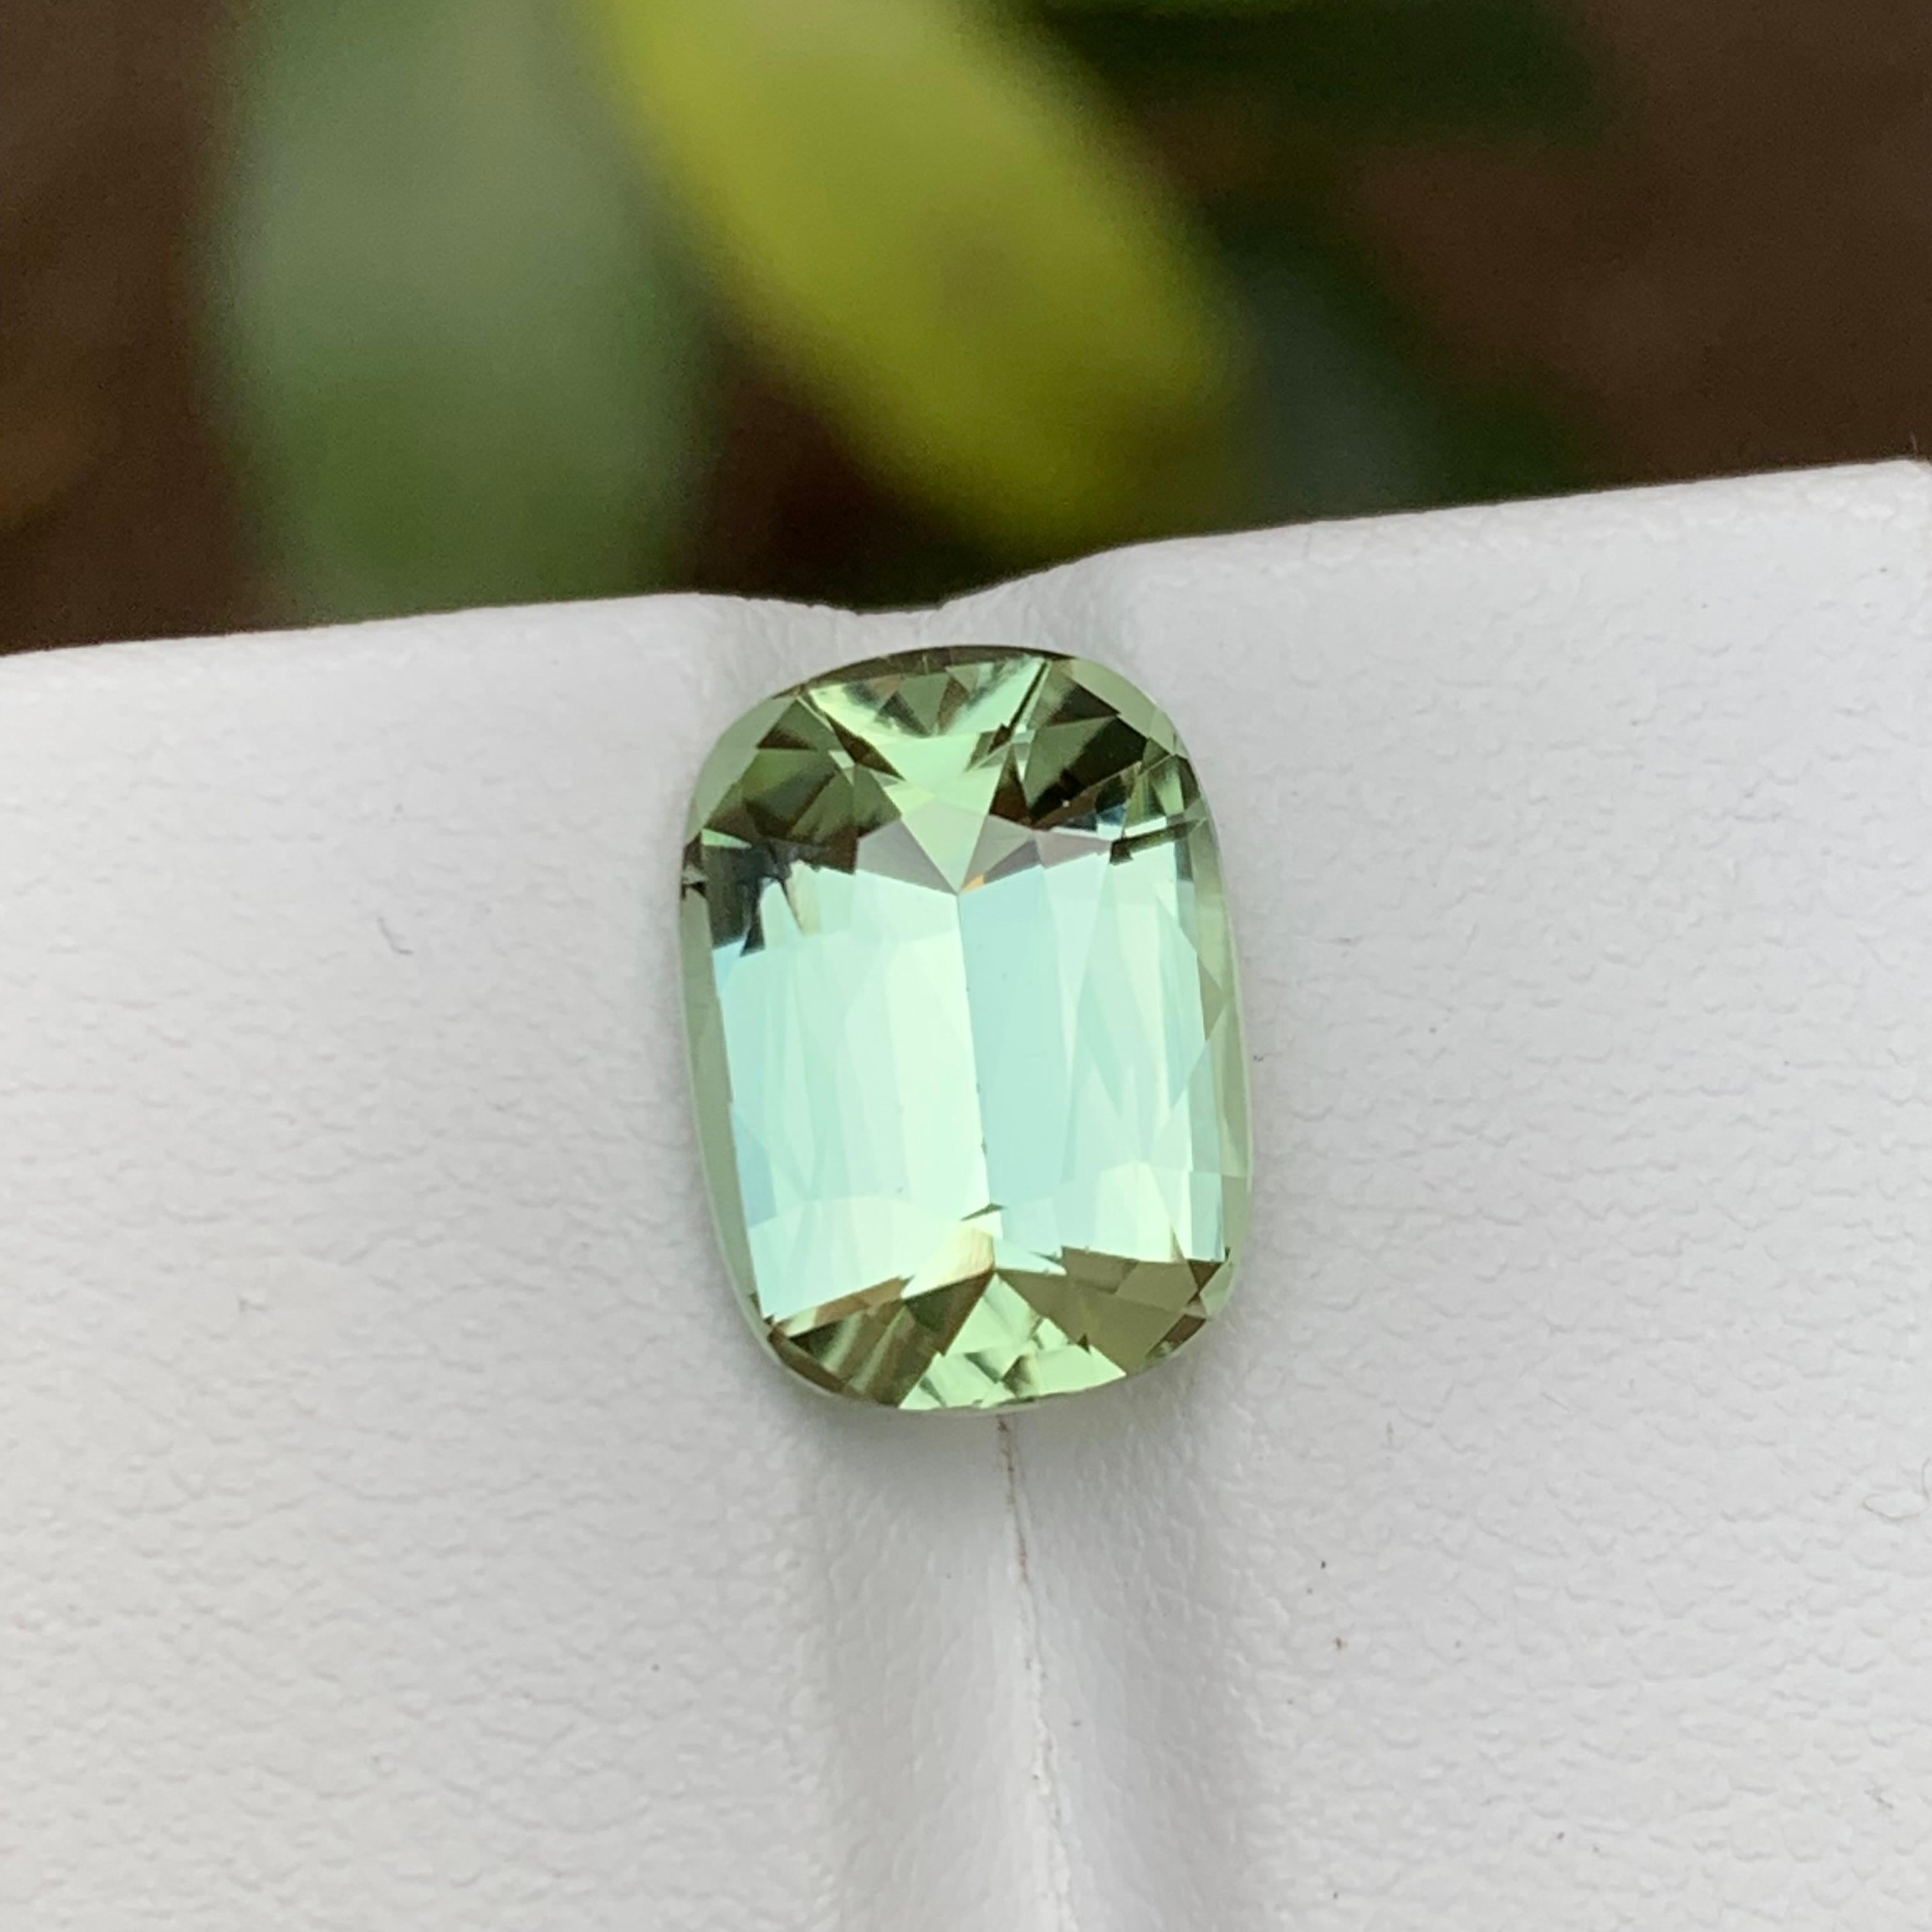 Pale Green Natural Tourmaline Gemstone 5.35 Ct Step Cushion Cut for Ring/Pendant For Sale 7